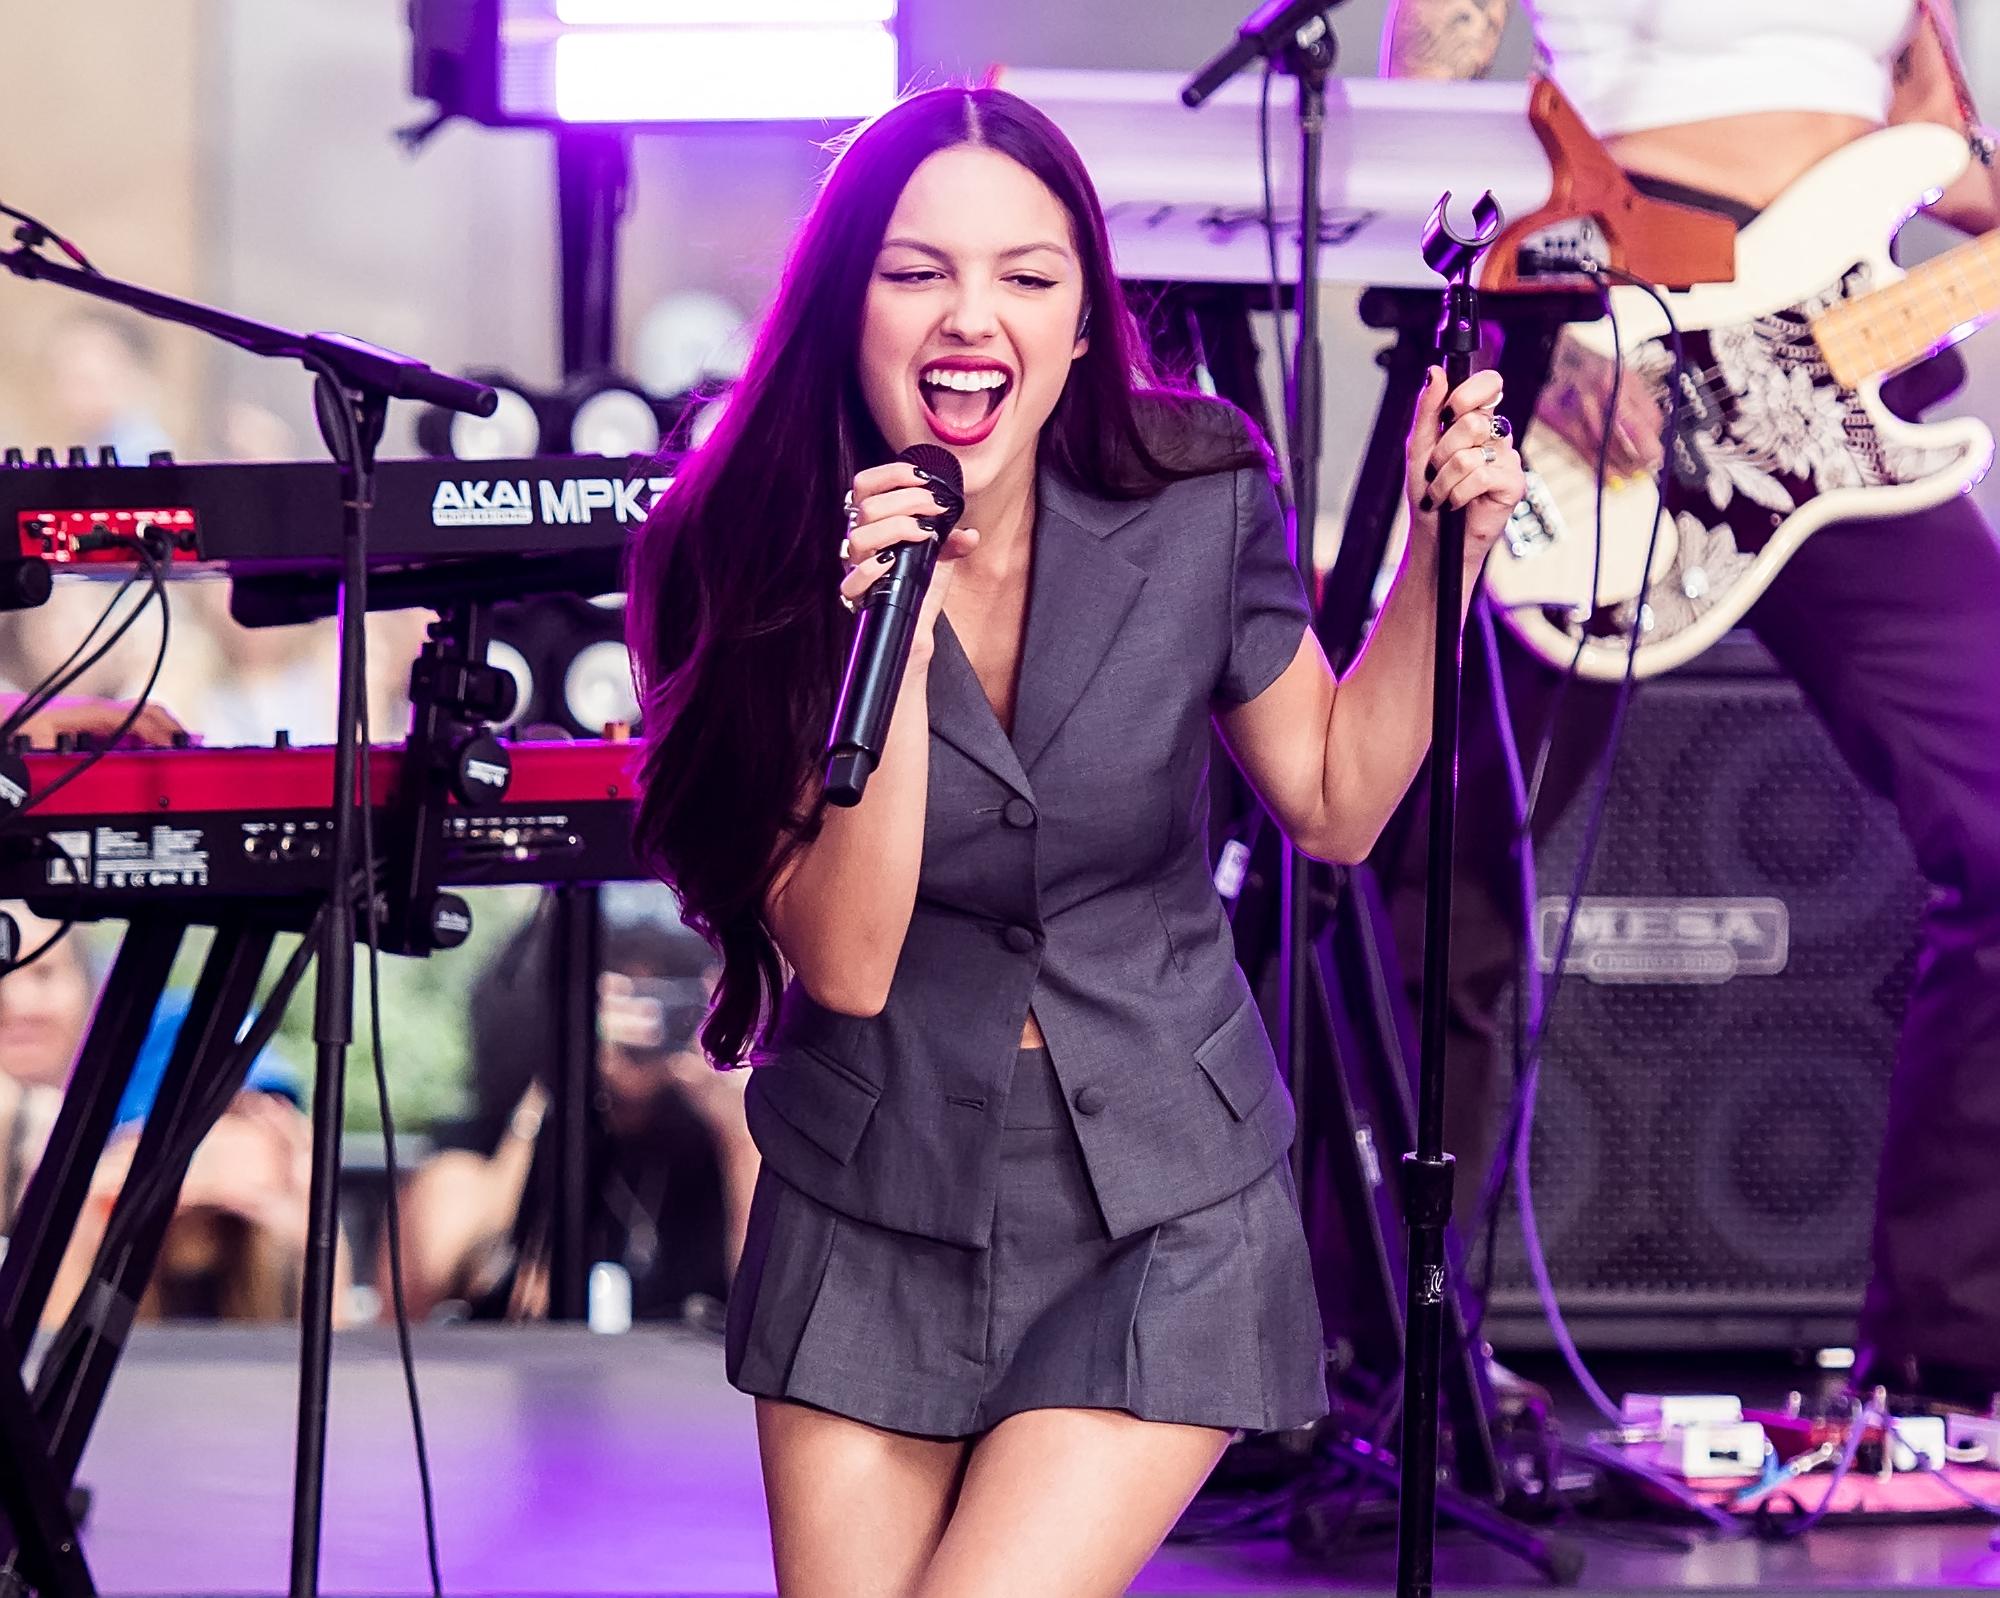 Olivia Rodrigo Stirs Up Controversy By Handing Out Morning-After Pills At Concert